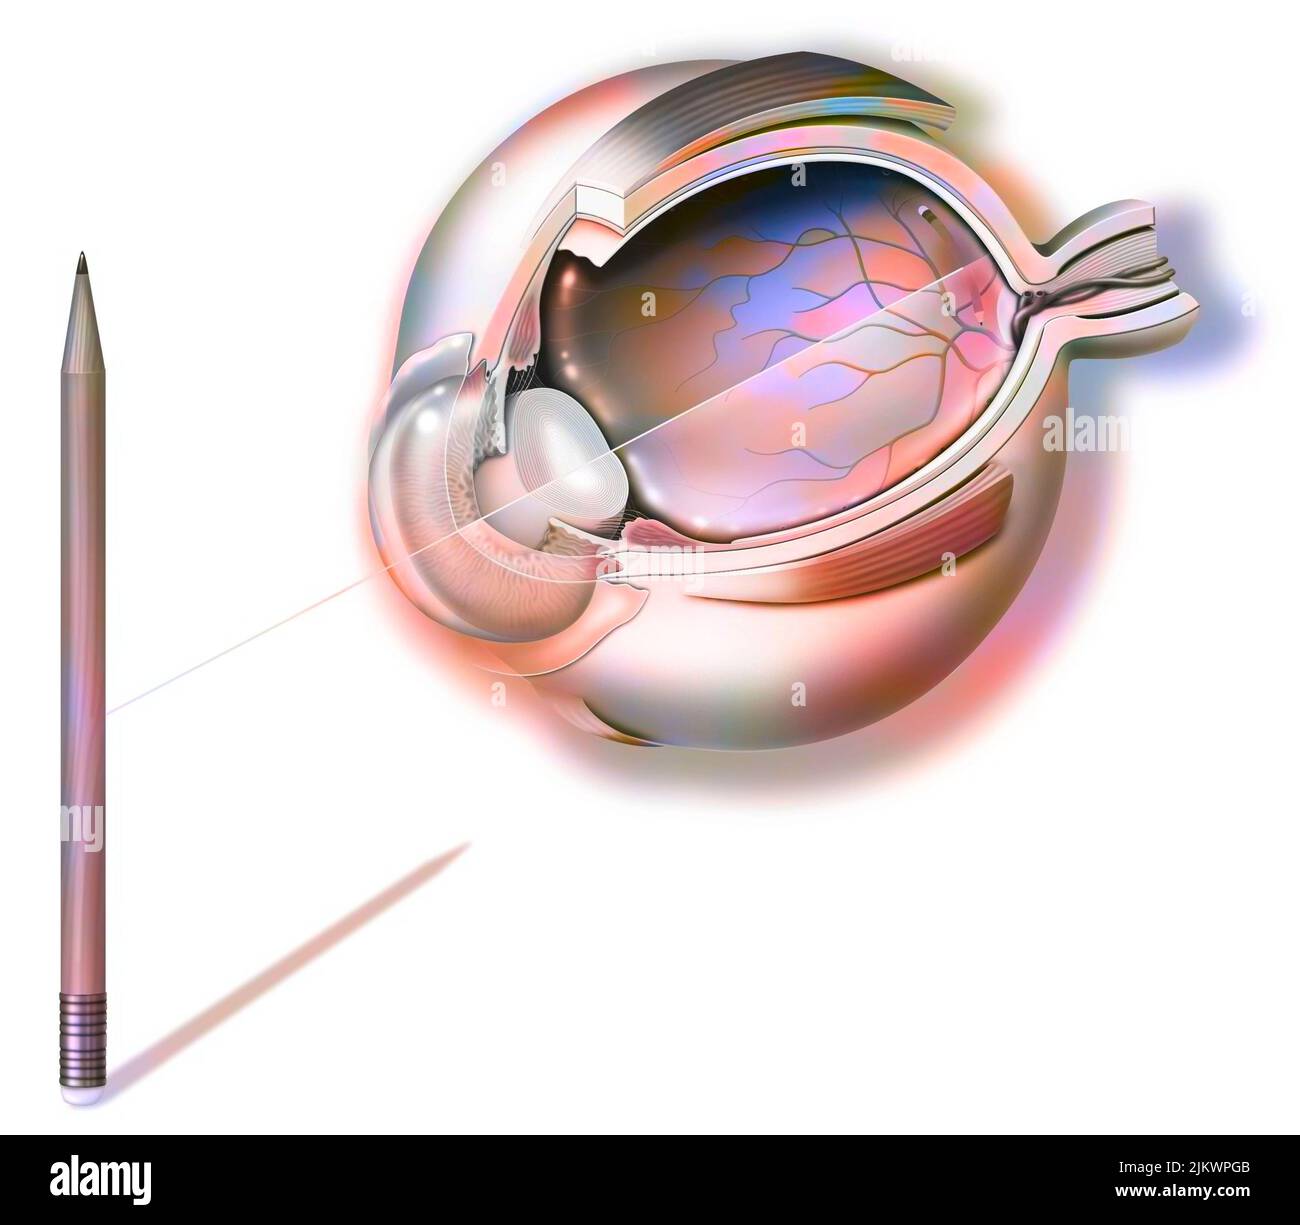 Anatomy of an eye and vision, pencil reflection on the retina. Stock Photo